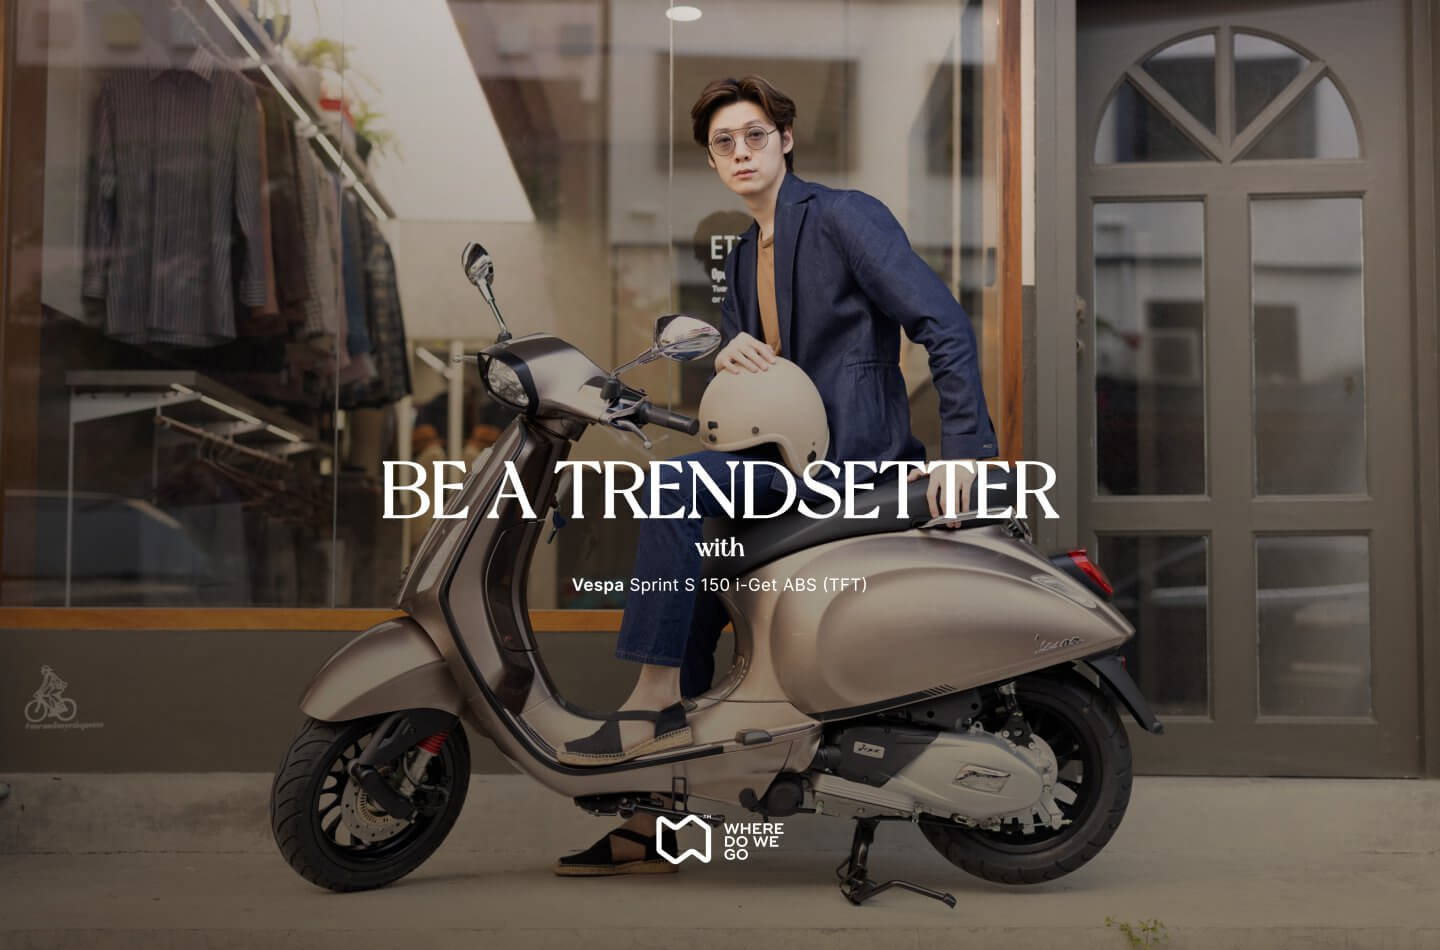 ‘Be a Trendsetter’ with Vespa Sprint S 150 i-Get ABS (TFT)